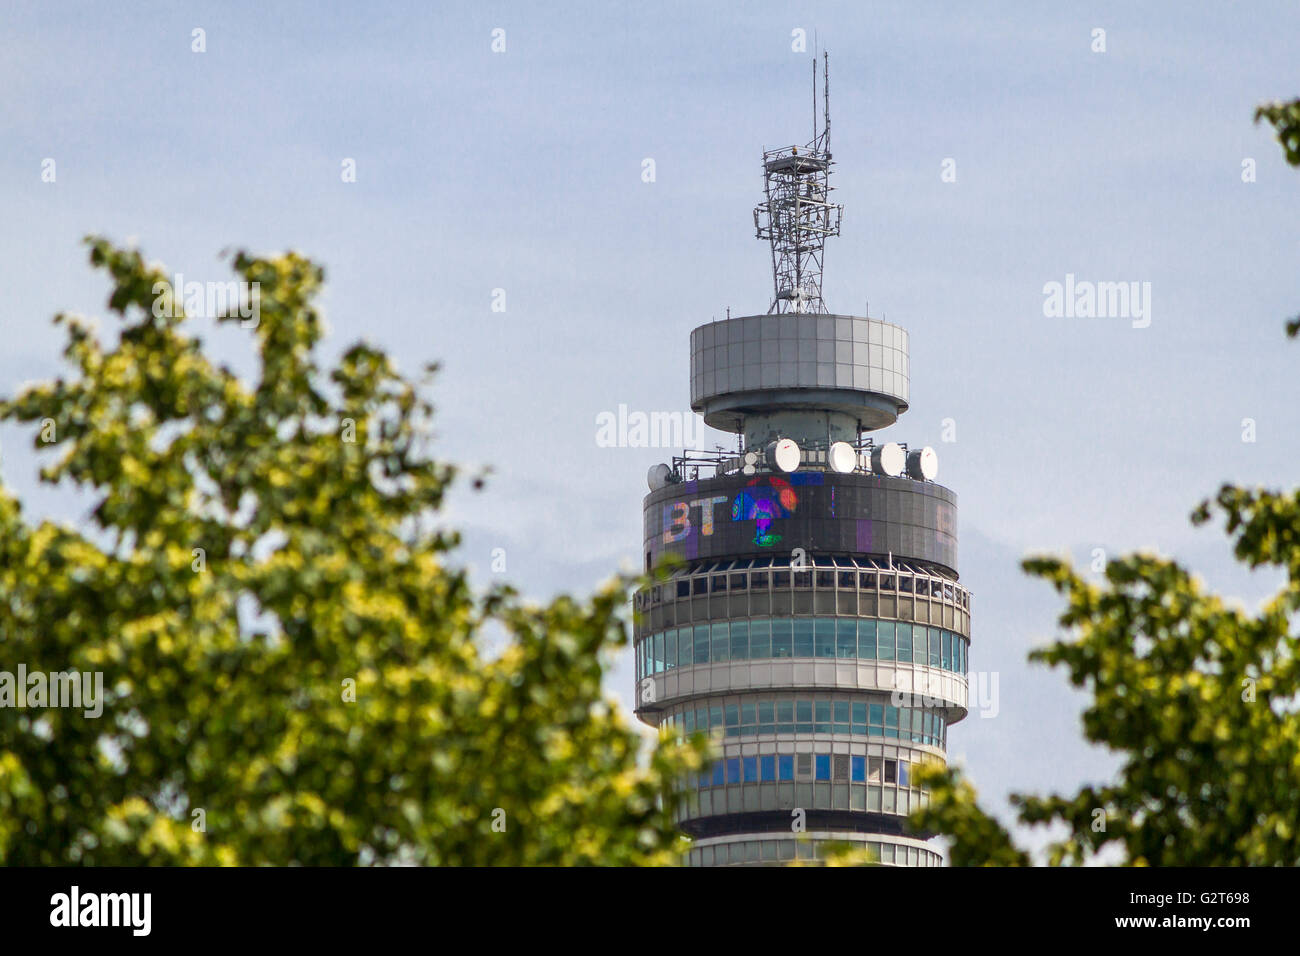 The BT Tower formerly known as The Post Office Tower  completed in 1964, seen through the trees from Regents Park in London, UK Stock Photo